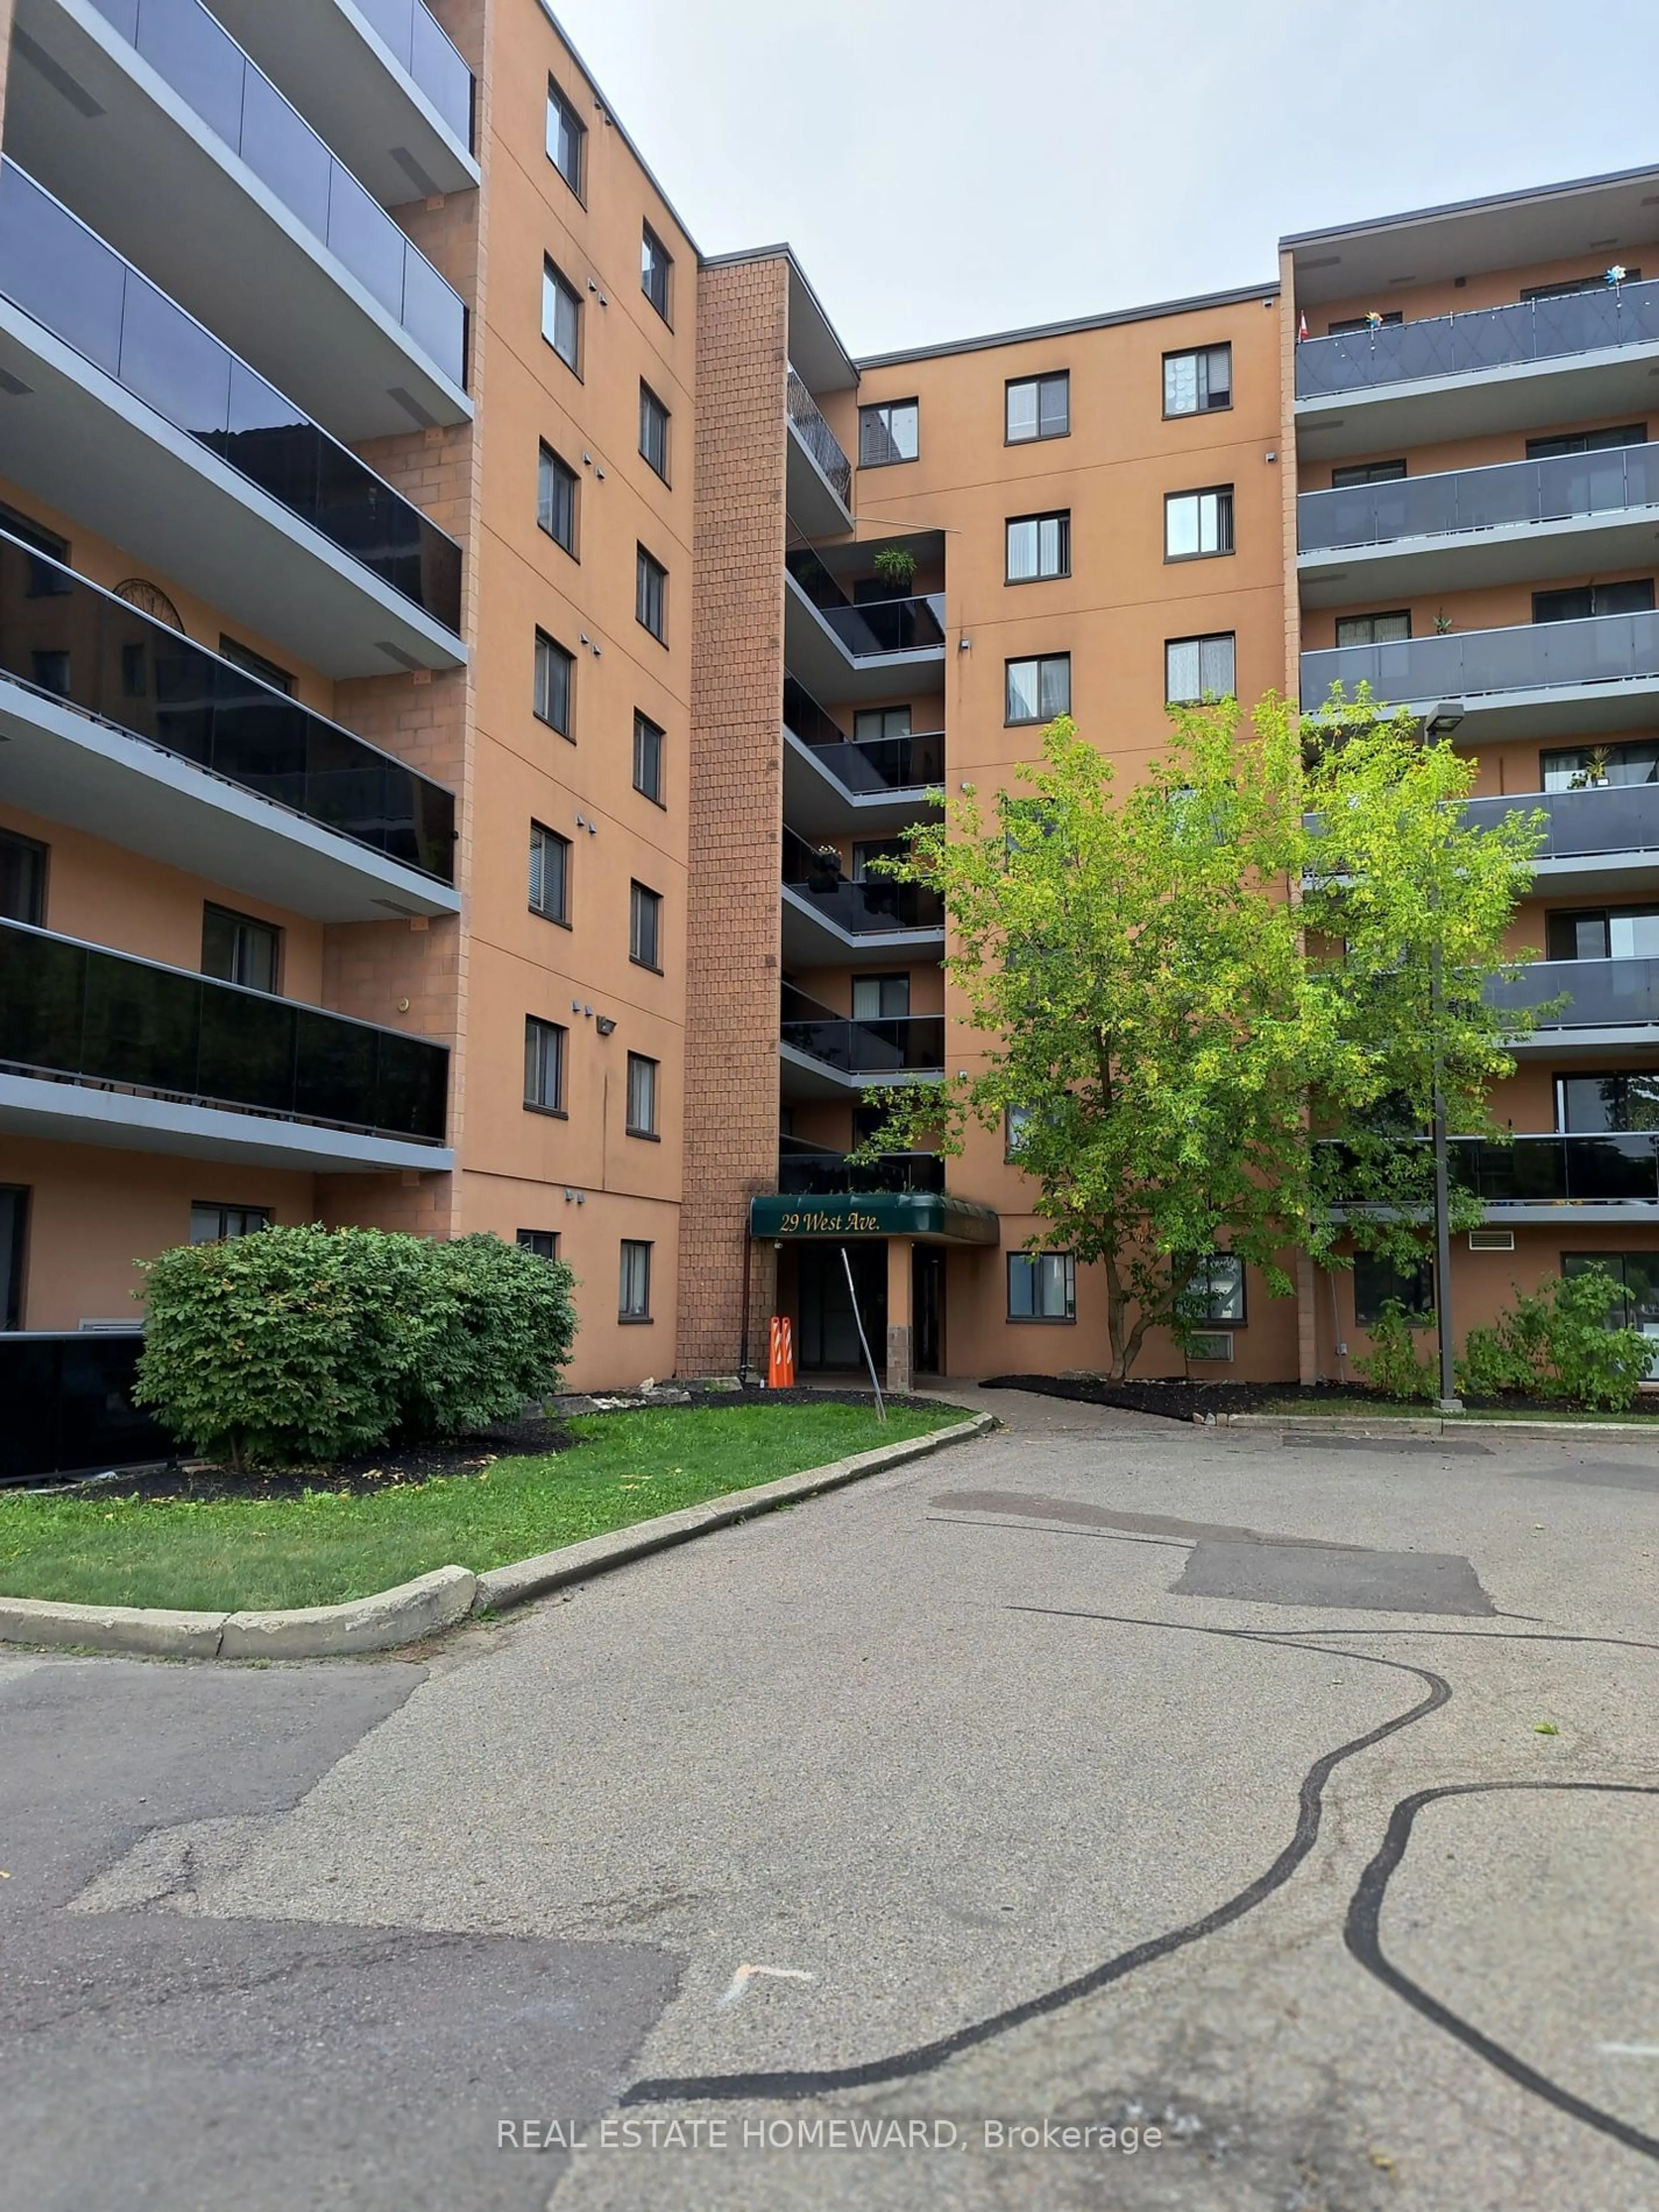 Outside view for 29 West Ave #502, Kitchener Ontario N2M 5E4